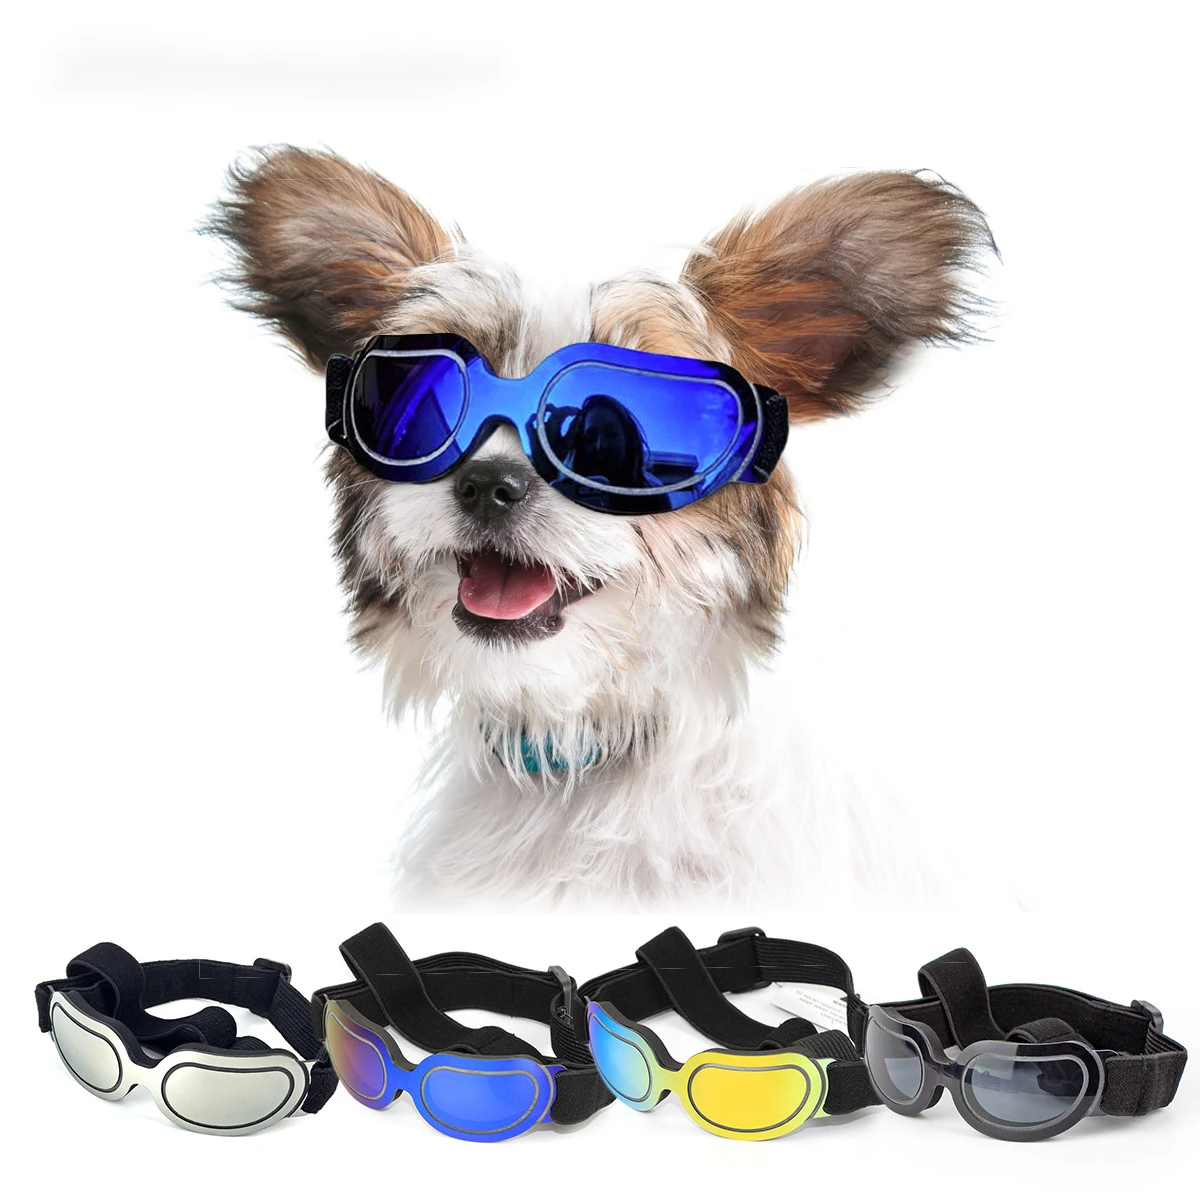 ATUBAN Small Dog Goggles Anti-UV Dog Sunglasses Windproof Snowproof Puppy Glasses with Flexible Straps for puppy accessories